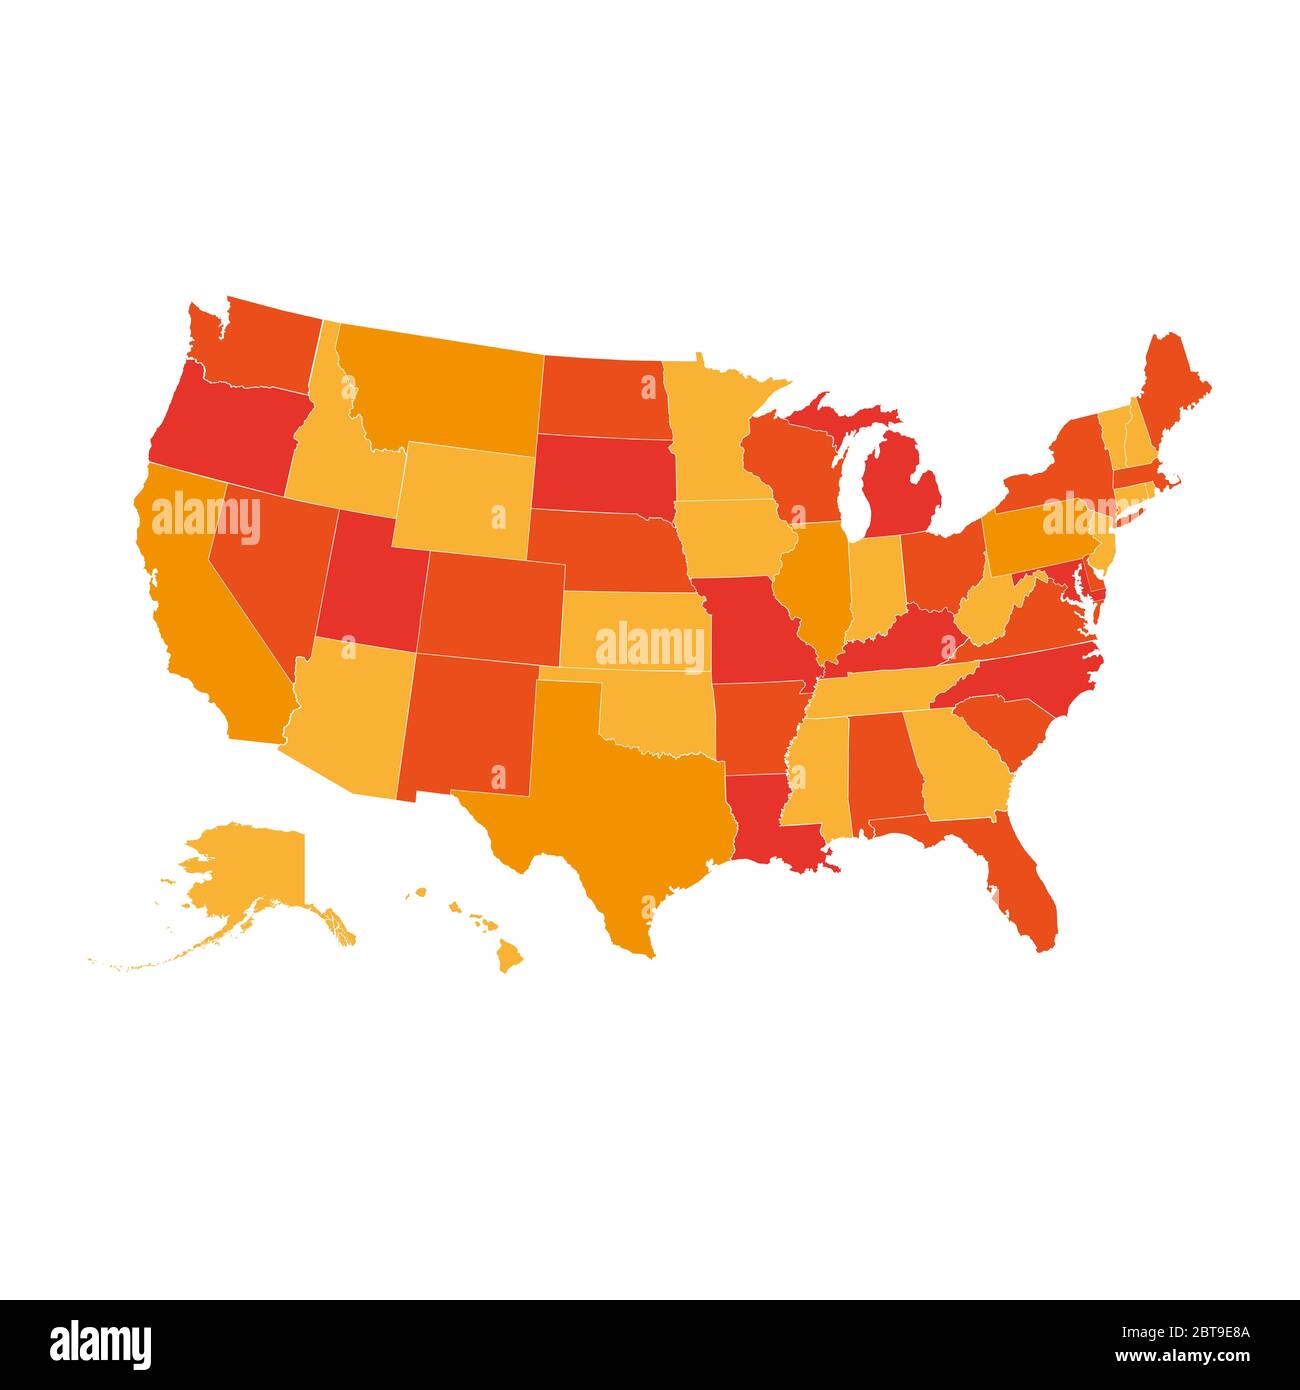 United States map, USA map in orange color palette, all states are separately. Stock Photo